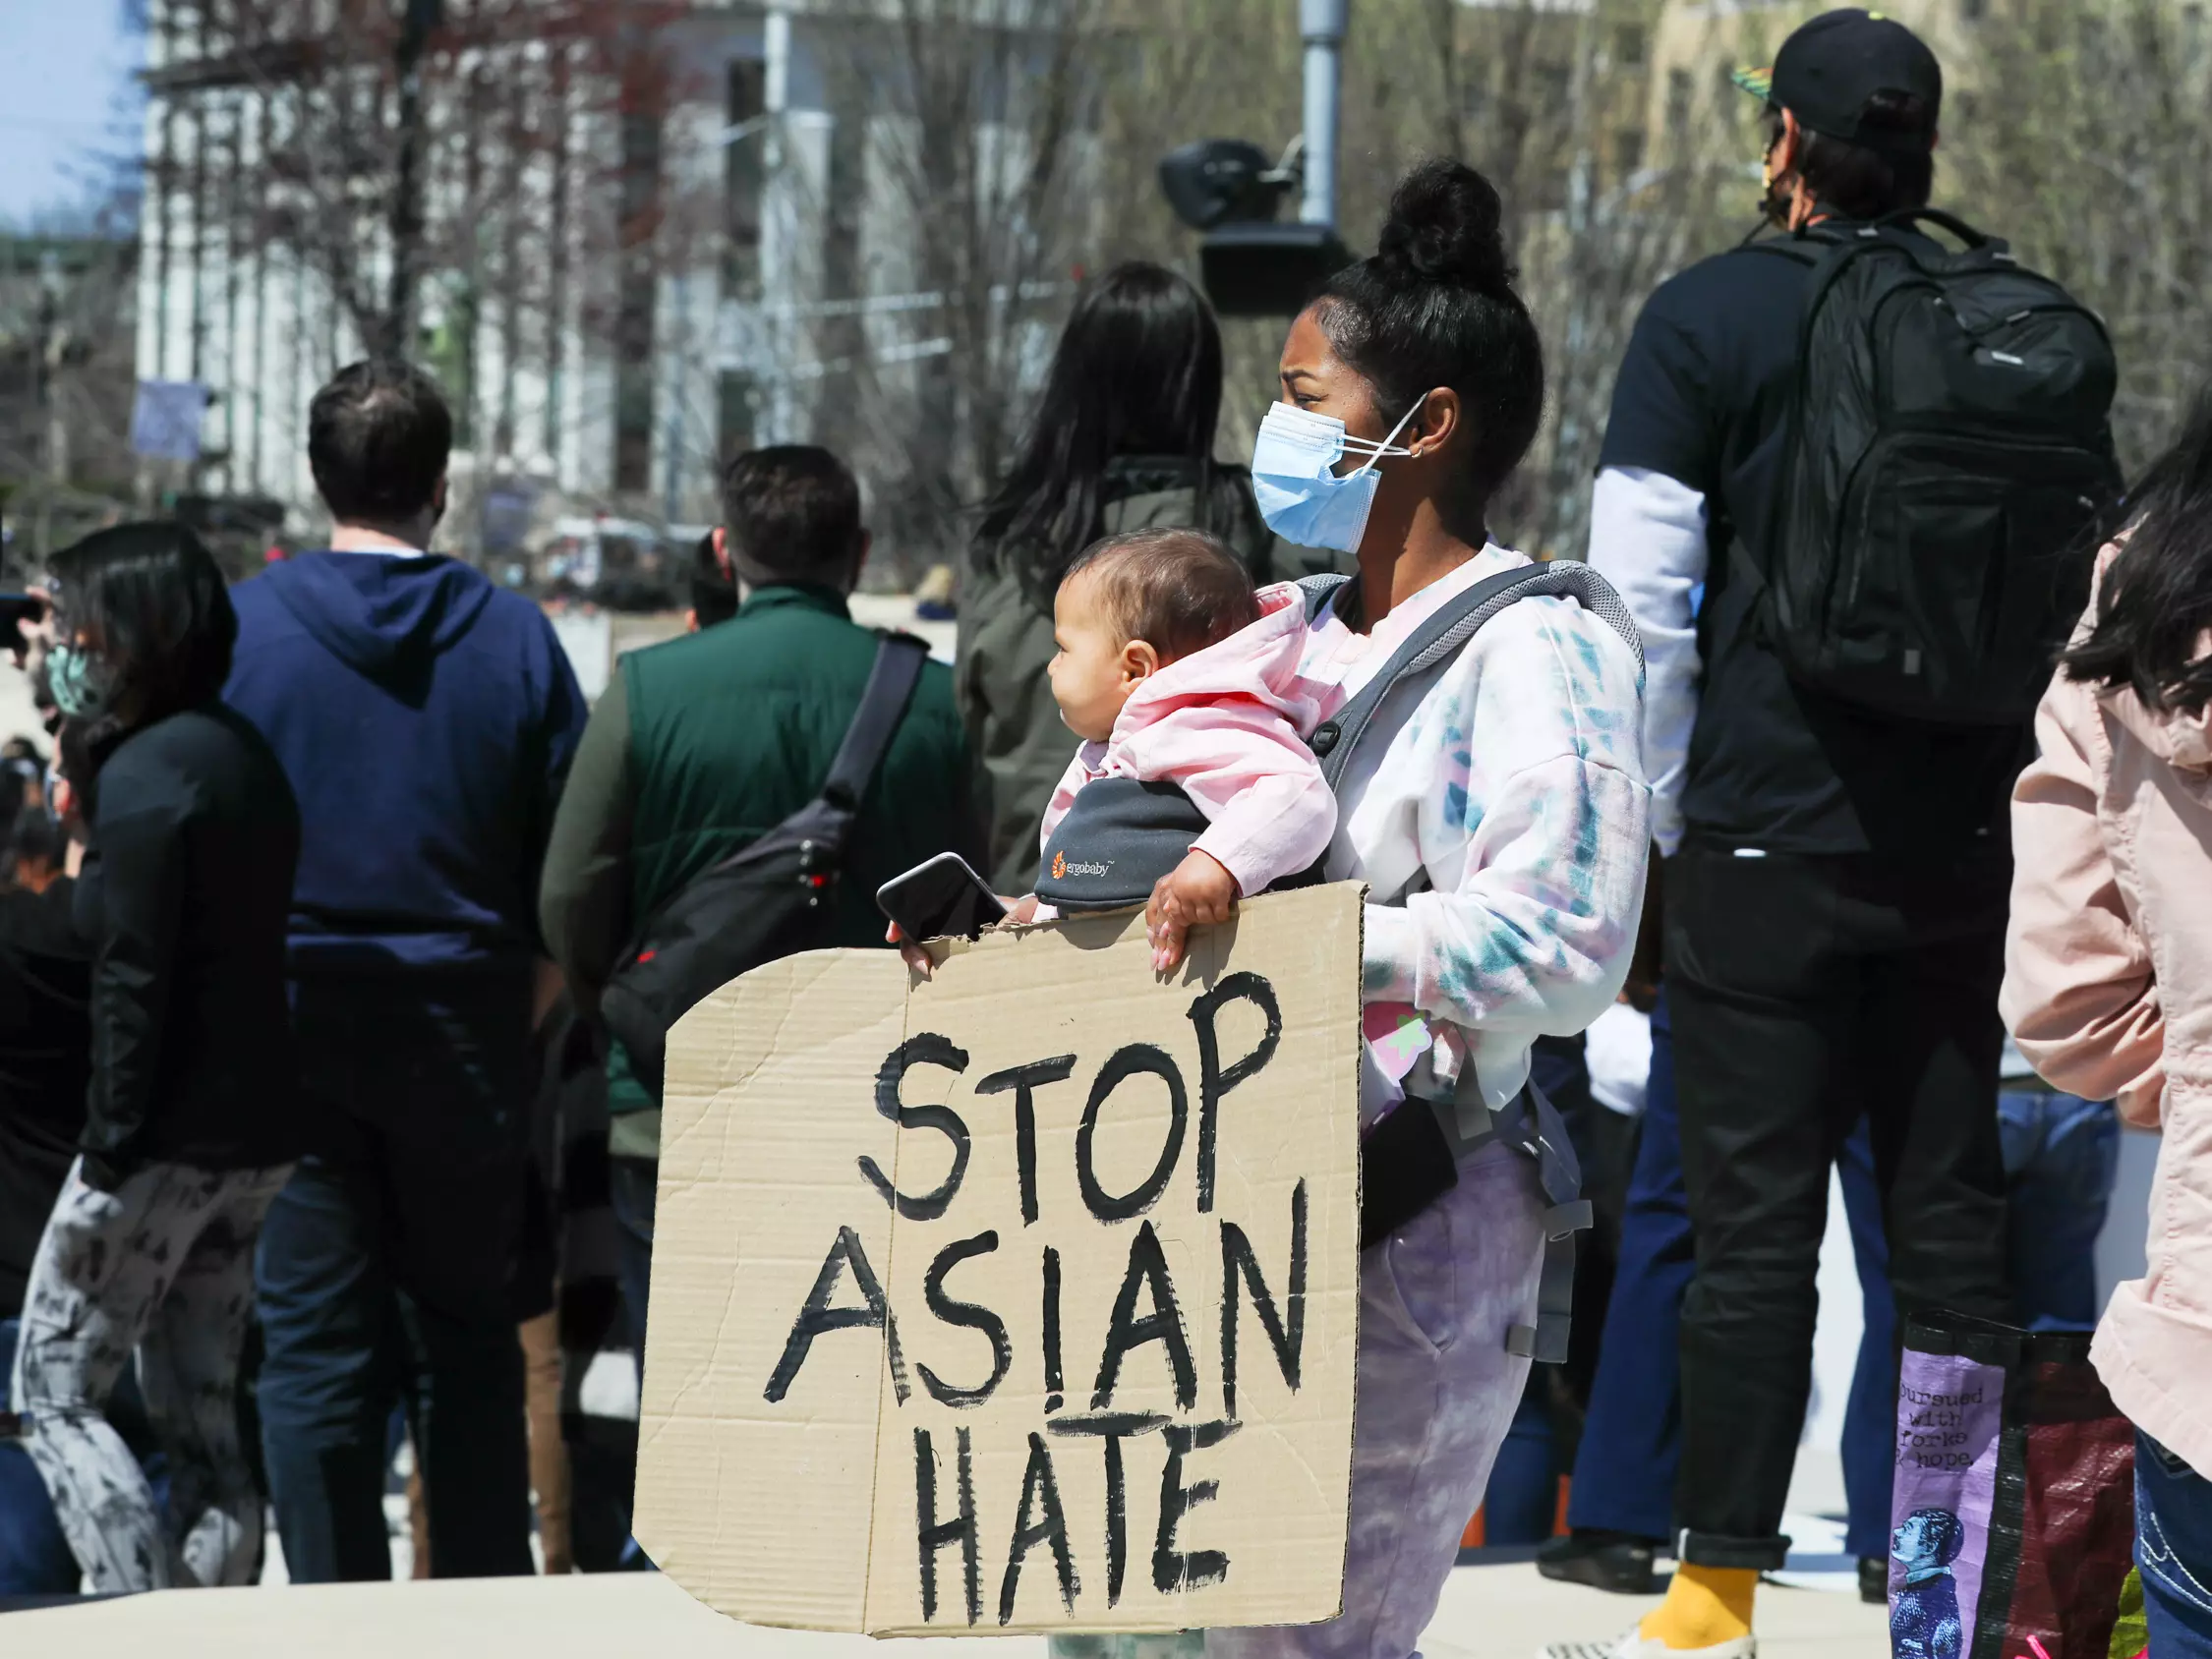 People have been demonstrating to demand an end to anti-Asian hate.